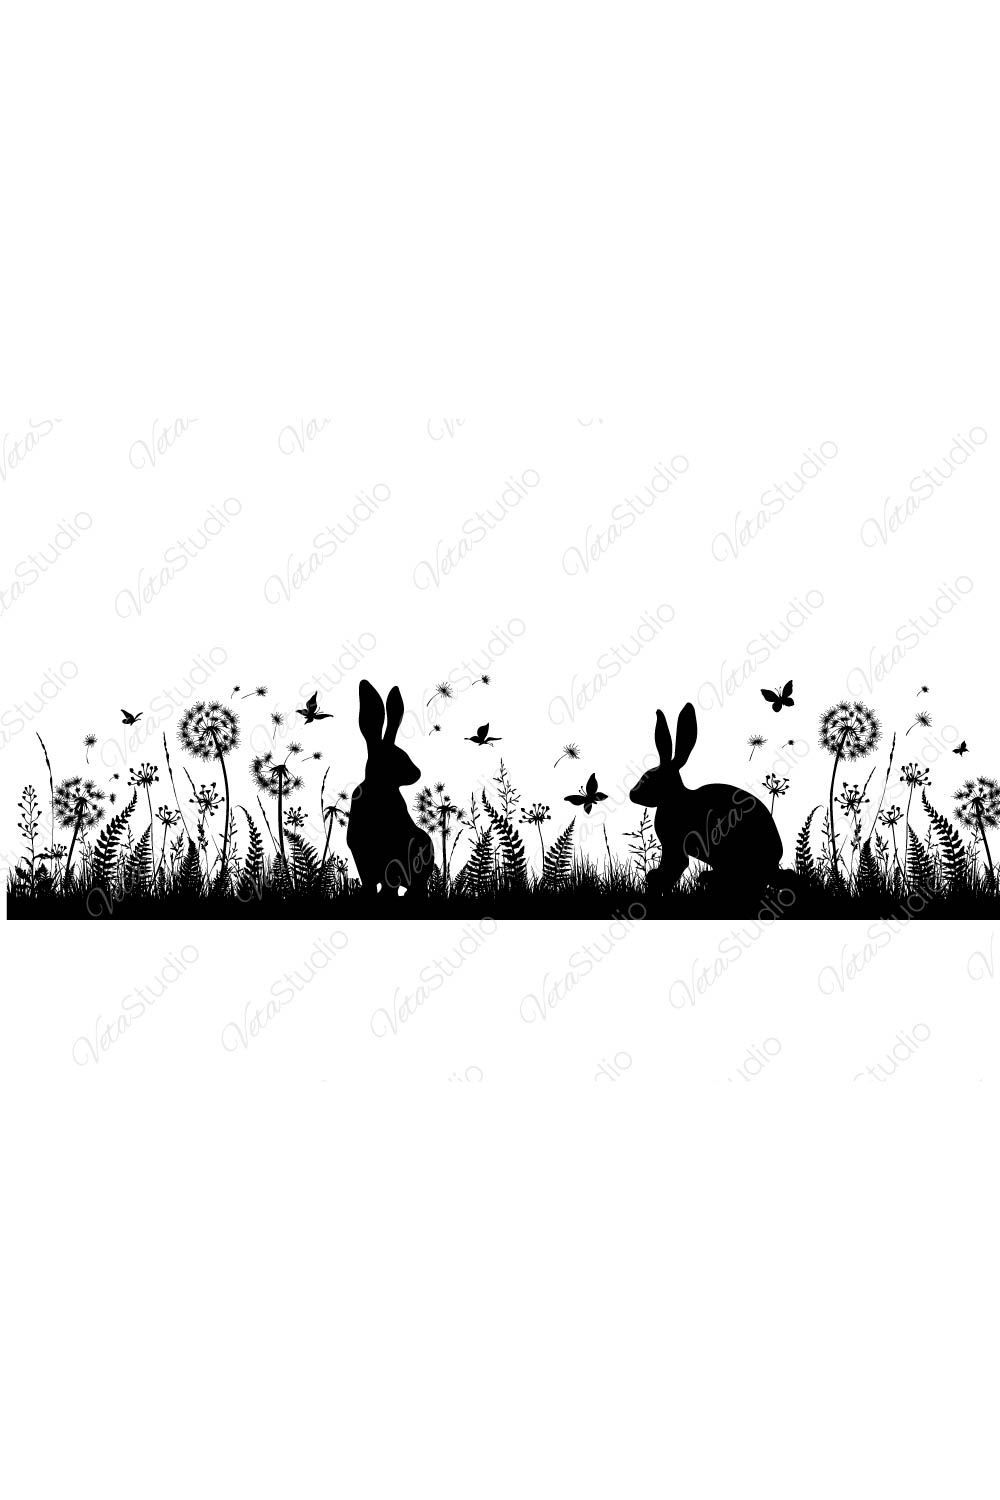 Floral Background With Rabbits pinterest image.